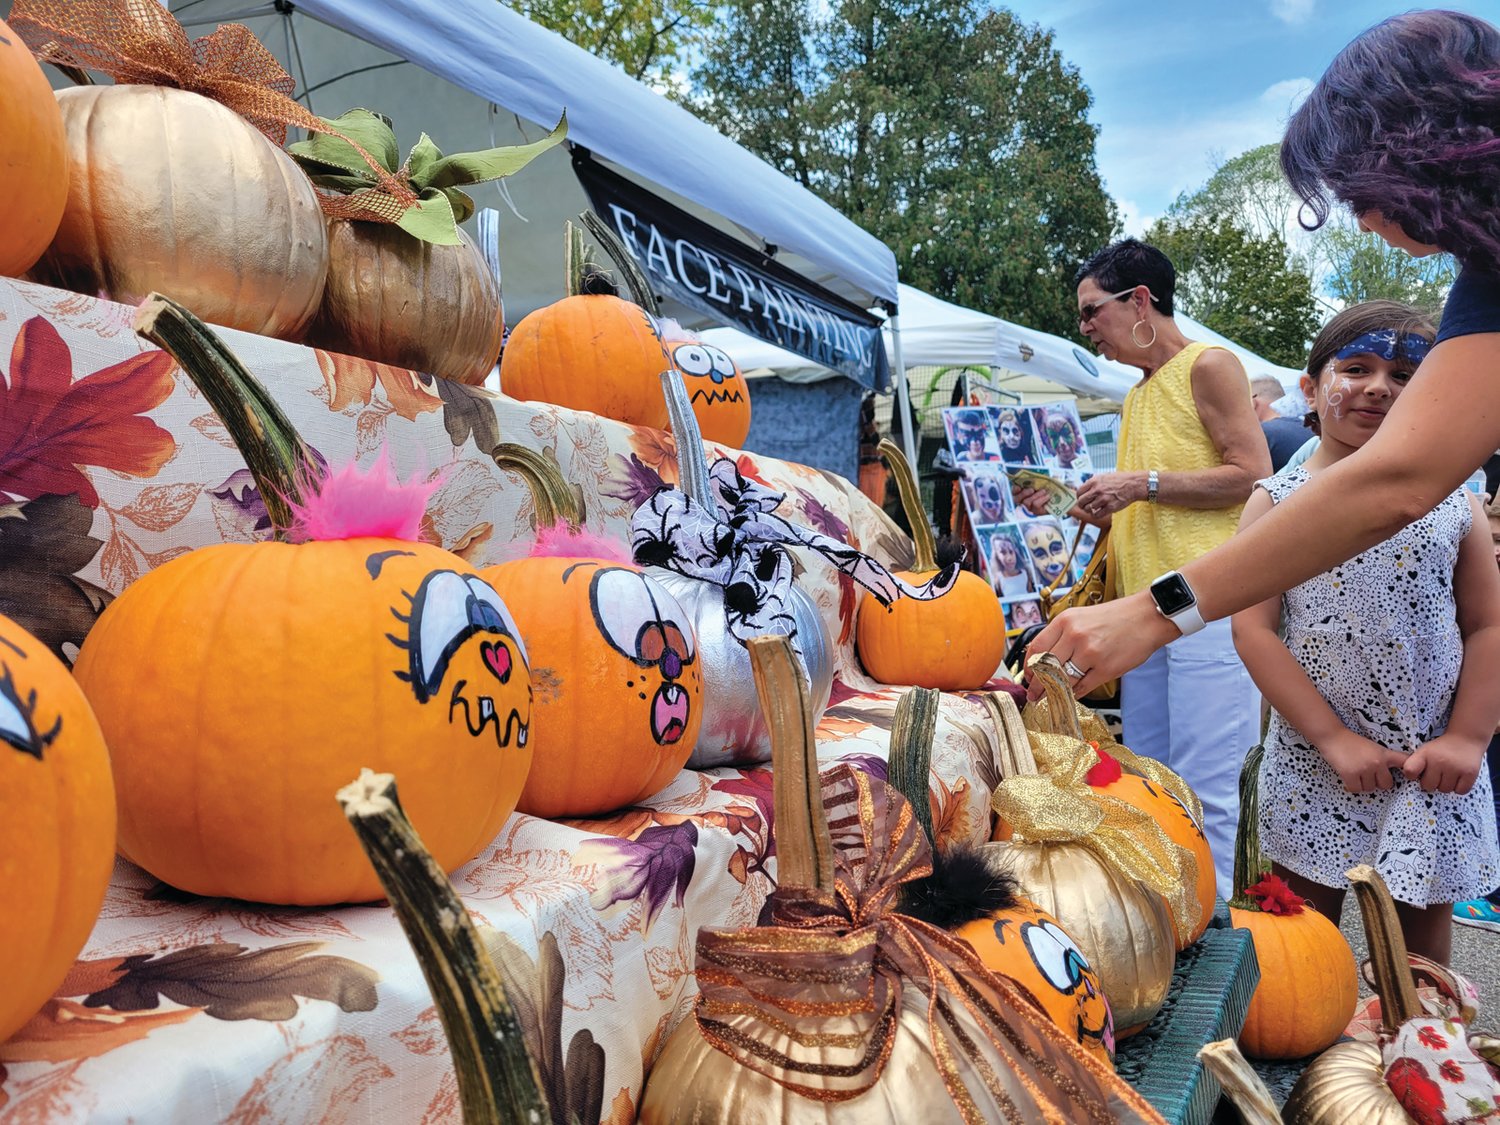 PUMPKIN SPICE: Pumpkins outnumbered apples at last year’s festival. Fall was certainly in the air.